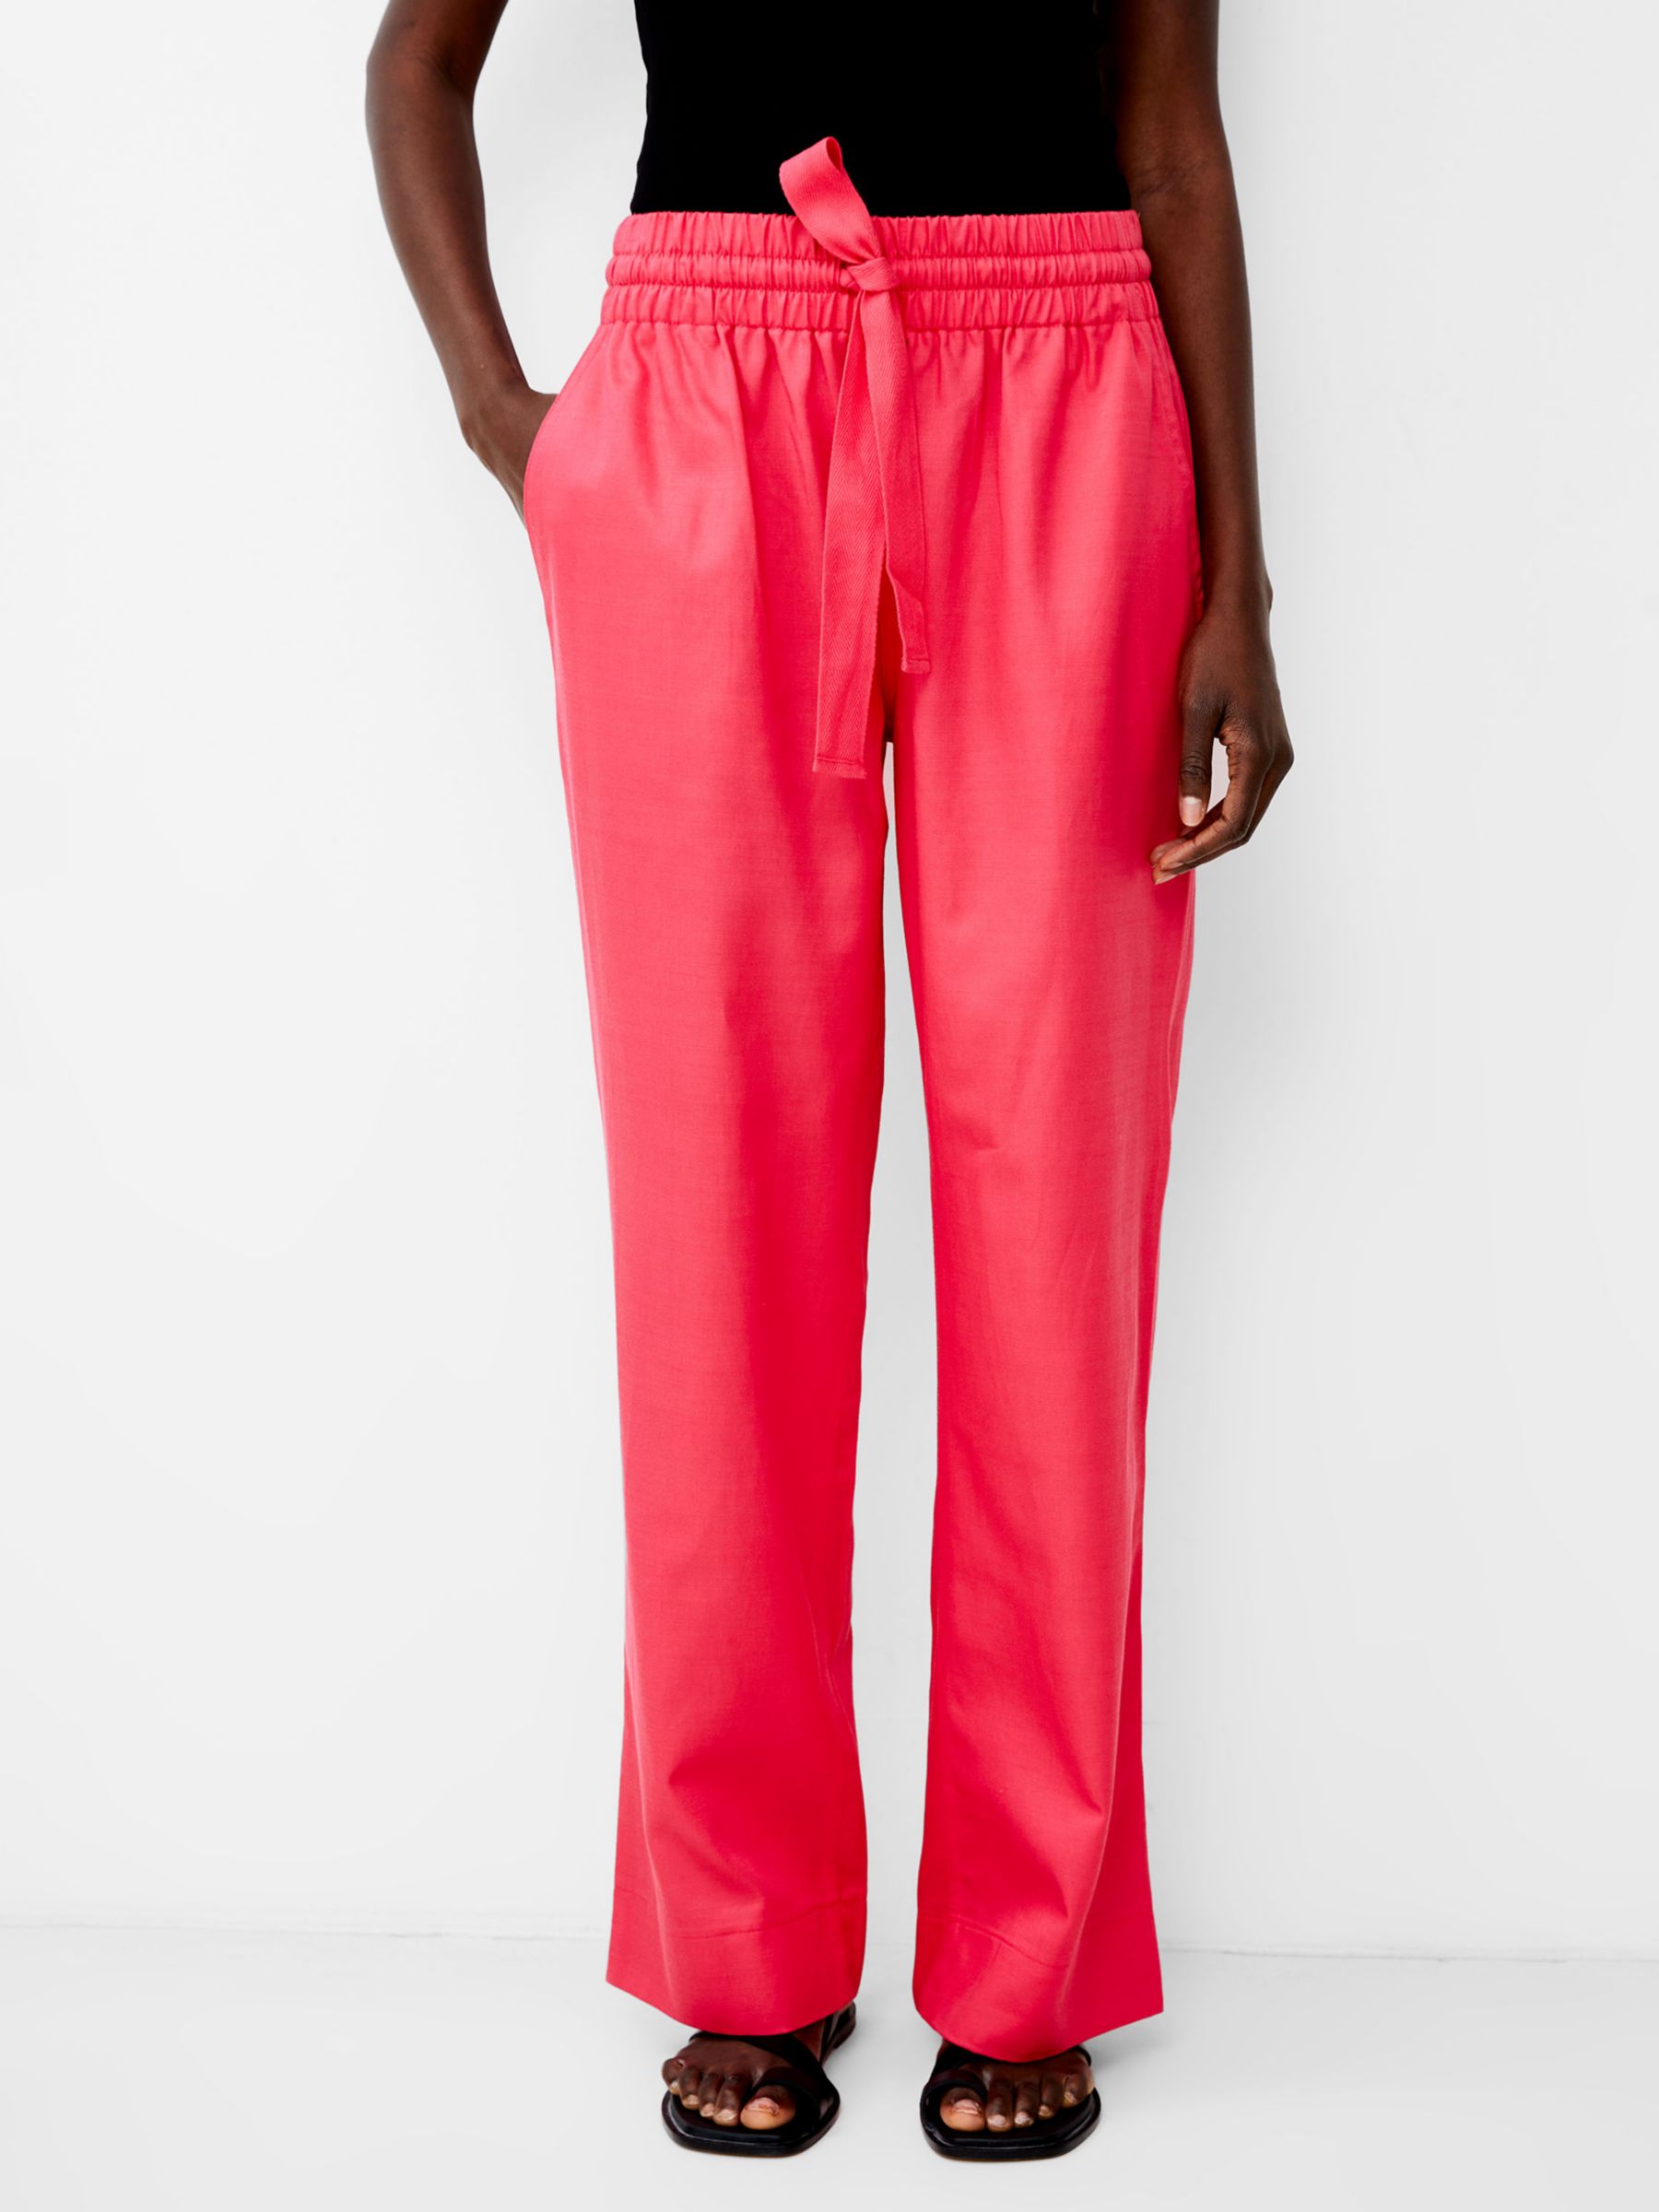 French Connection Bodie Cotton Blend Trousers, Azalea, S